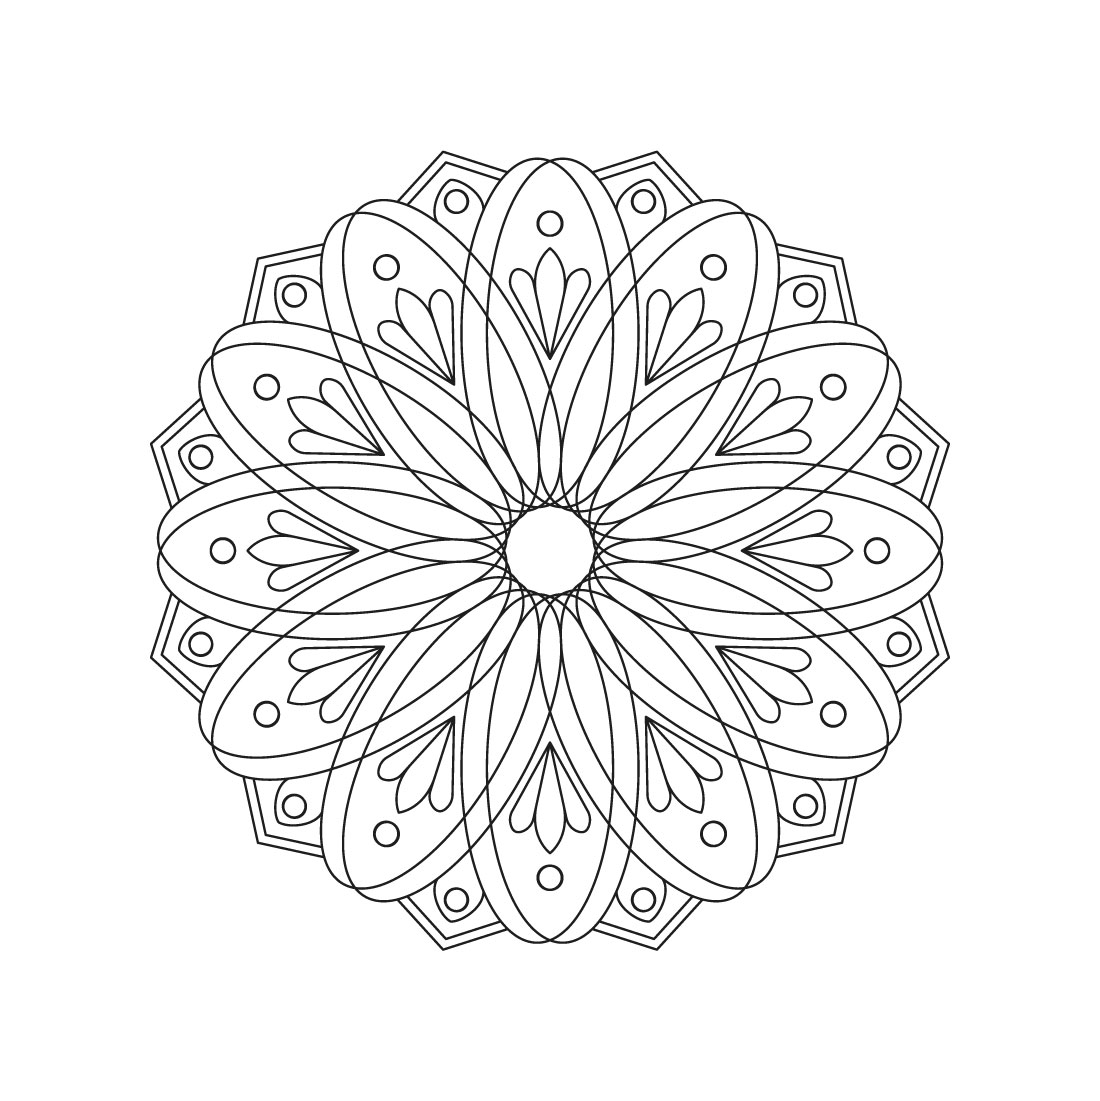 bundle of 10 blossoming beauty mandala coloring book pages 09 354